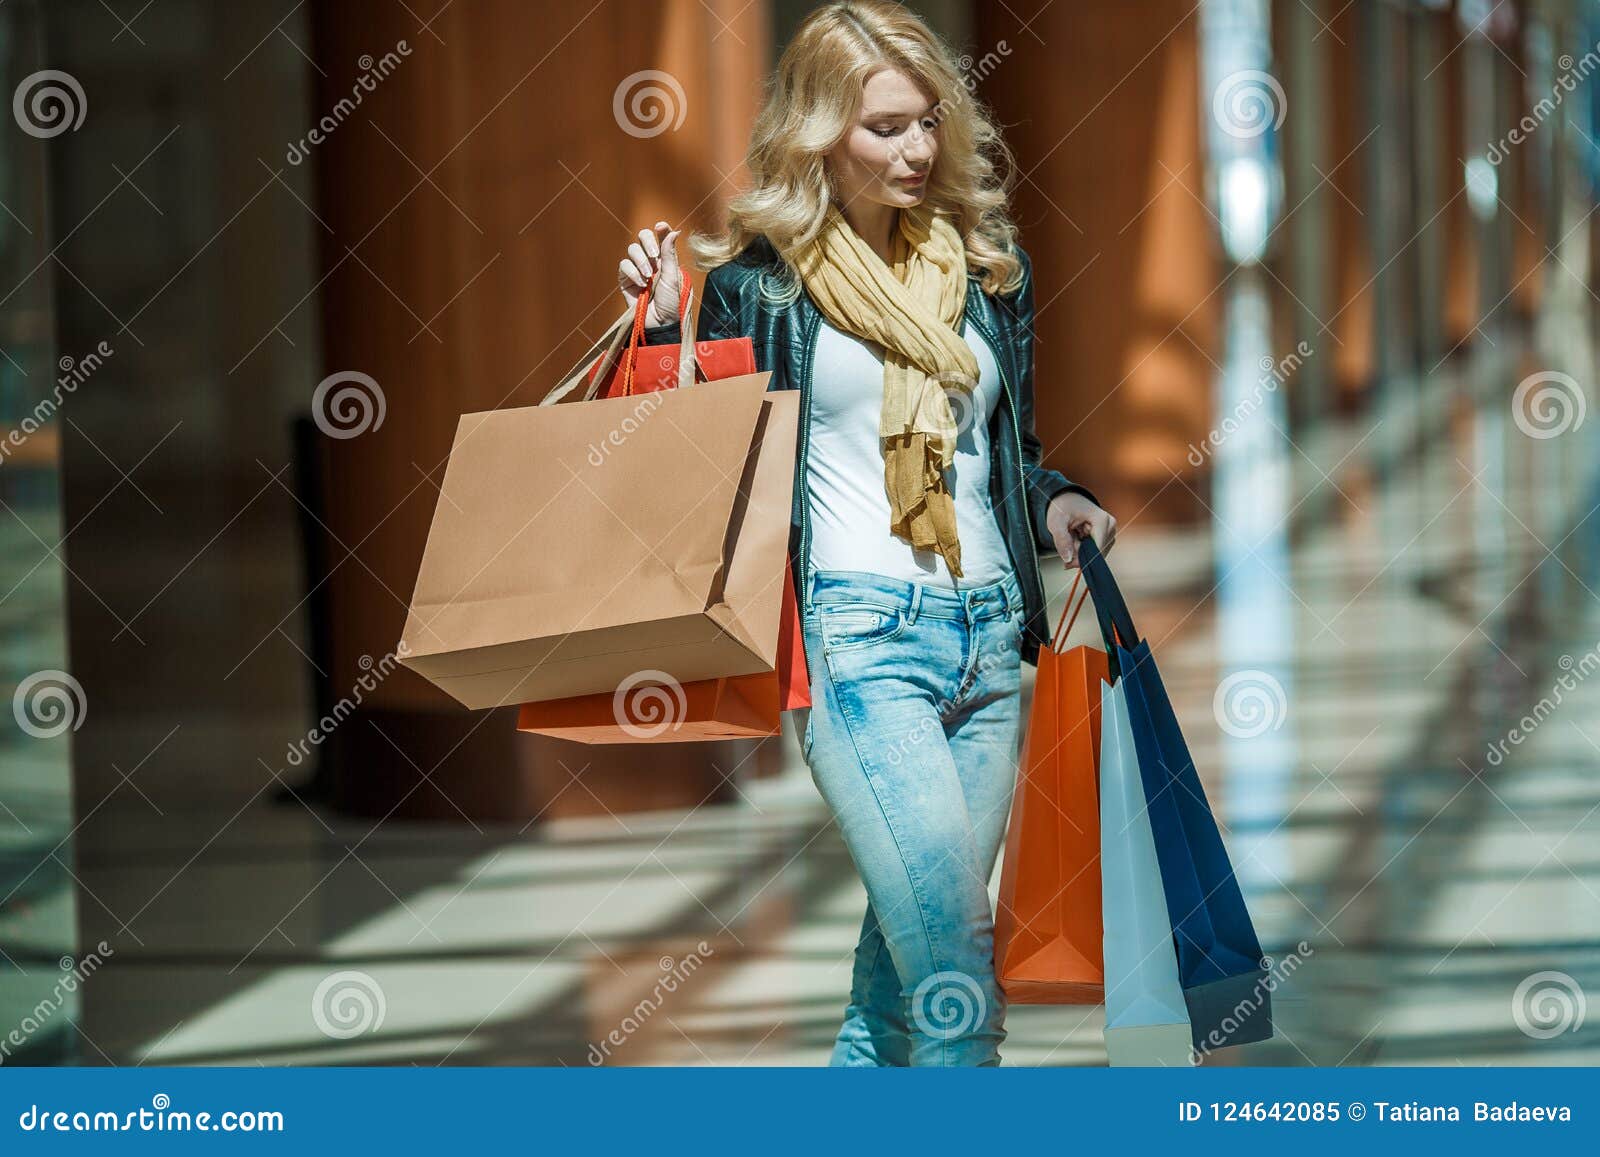 Woman with Colorful Shopping Bags Stock Image - Image of fashion ...